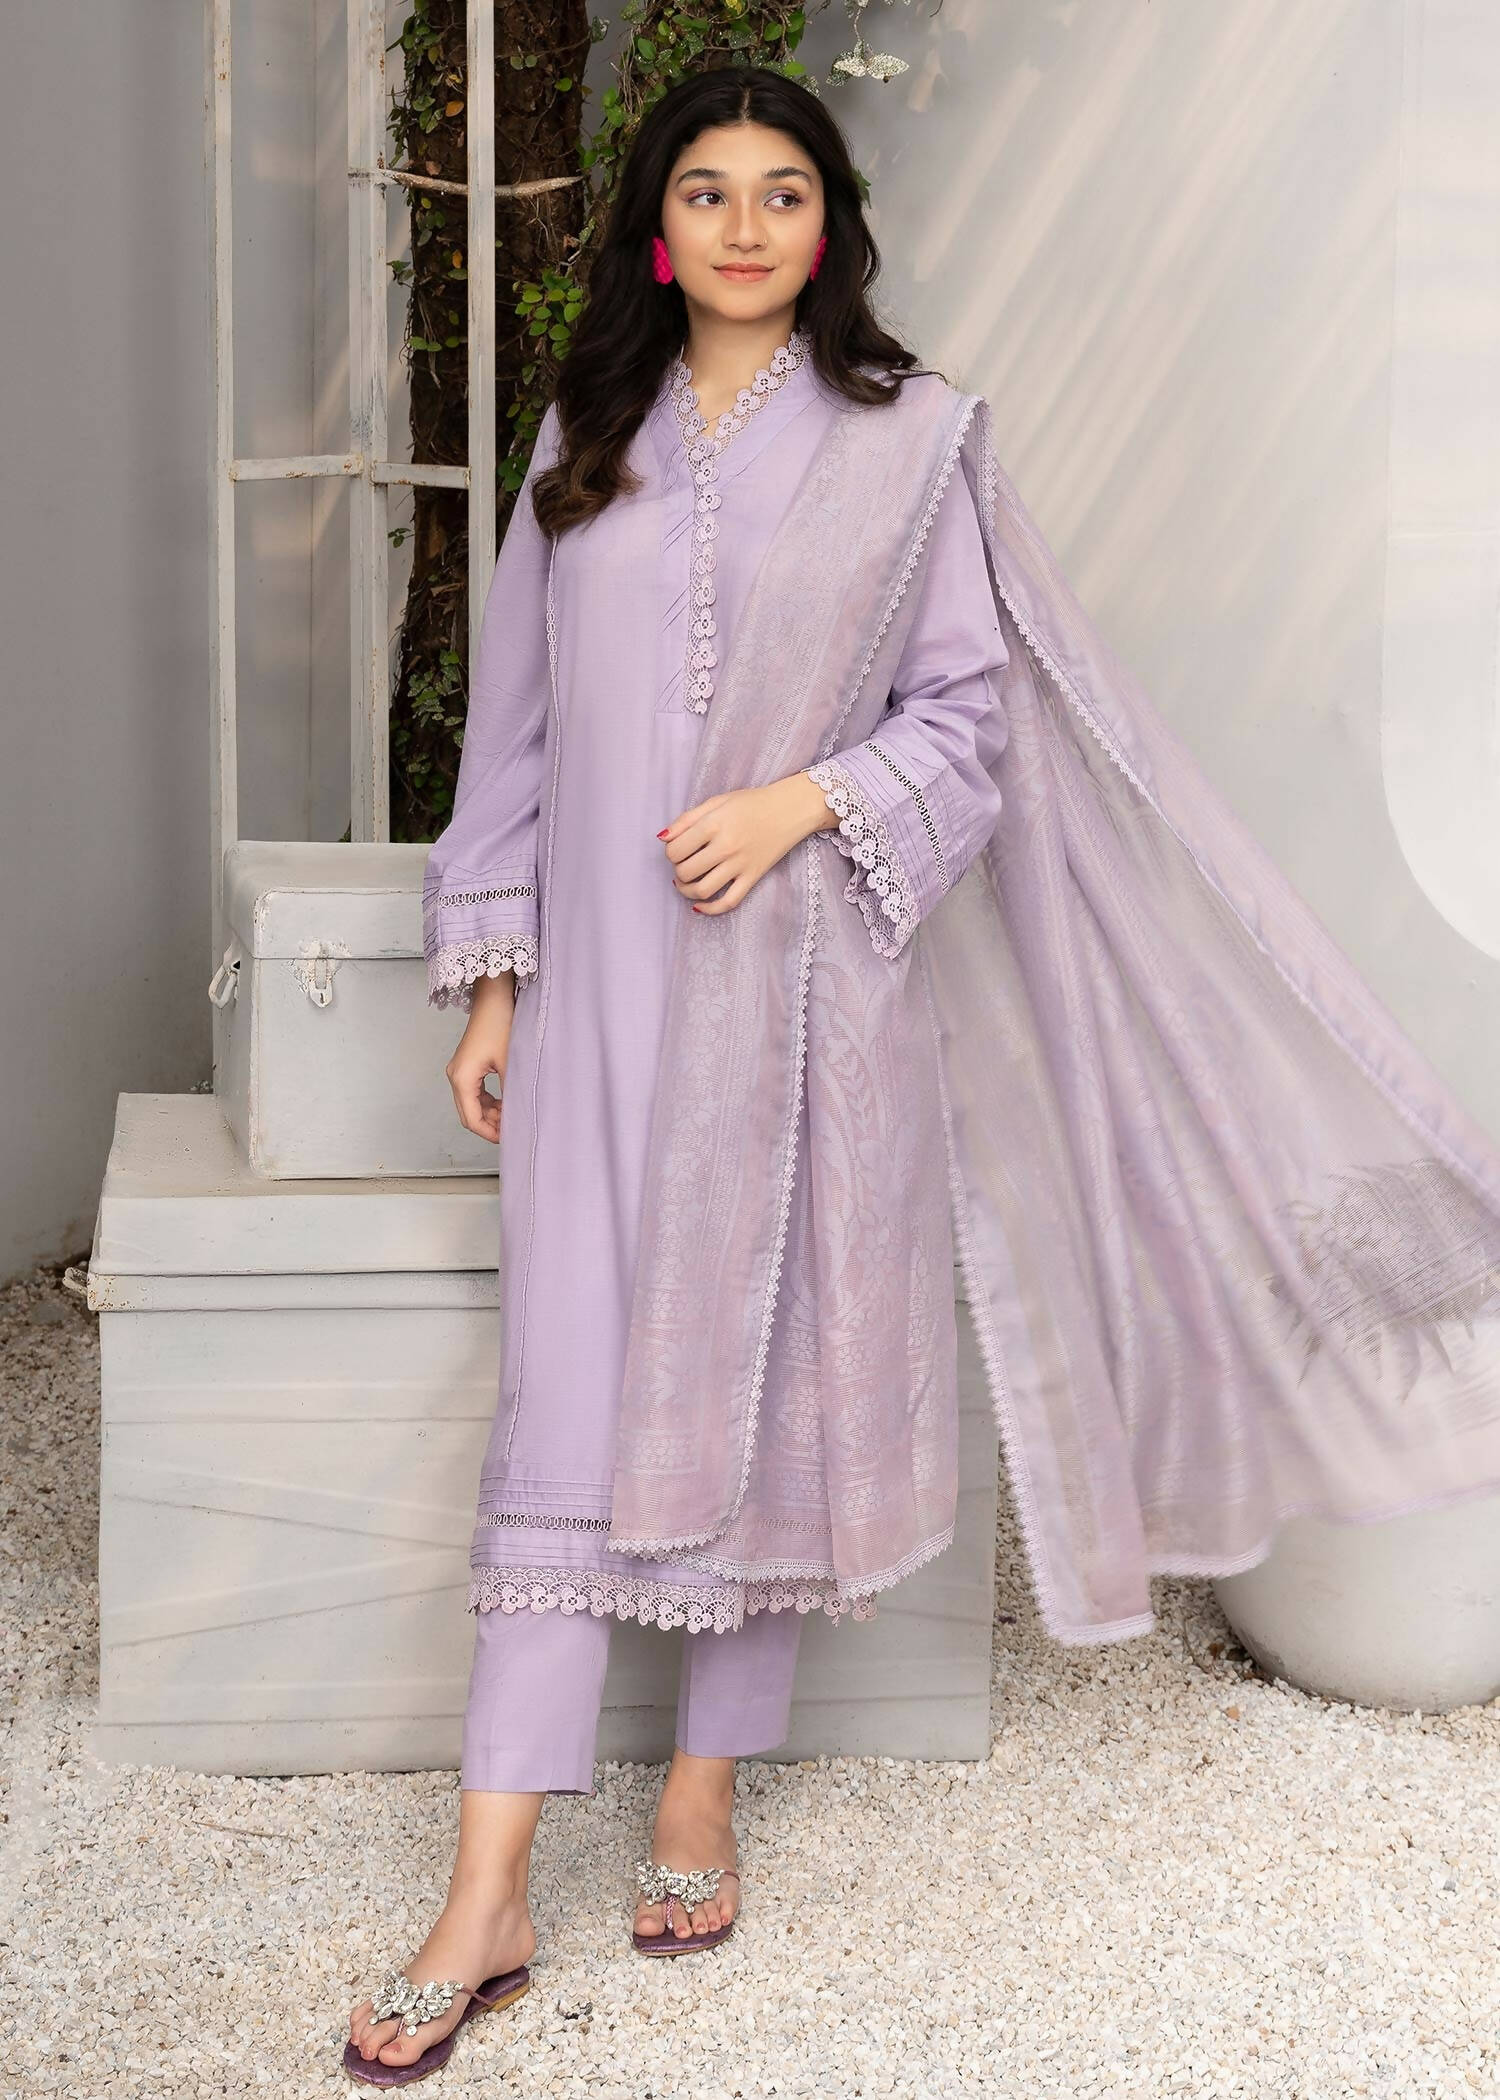 Lilium OWM9651 | Women Branded Kurta | All Sizes | Brand New with Tags